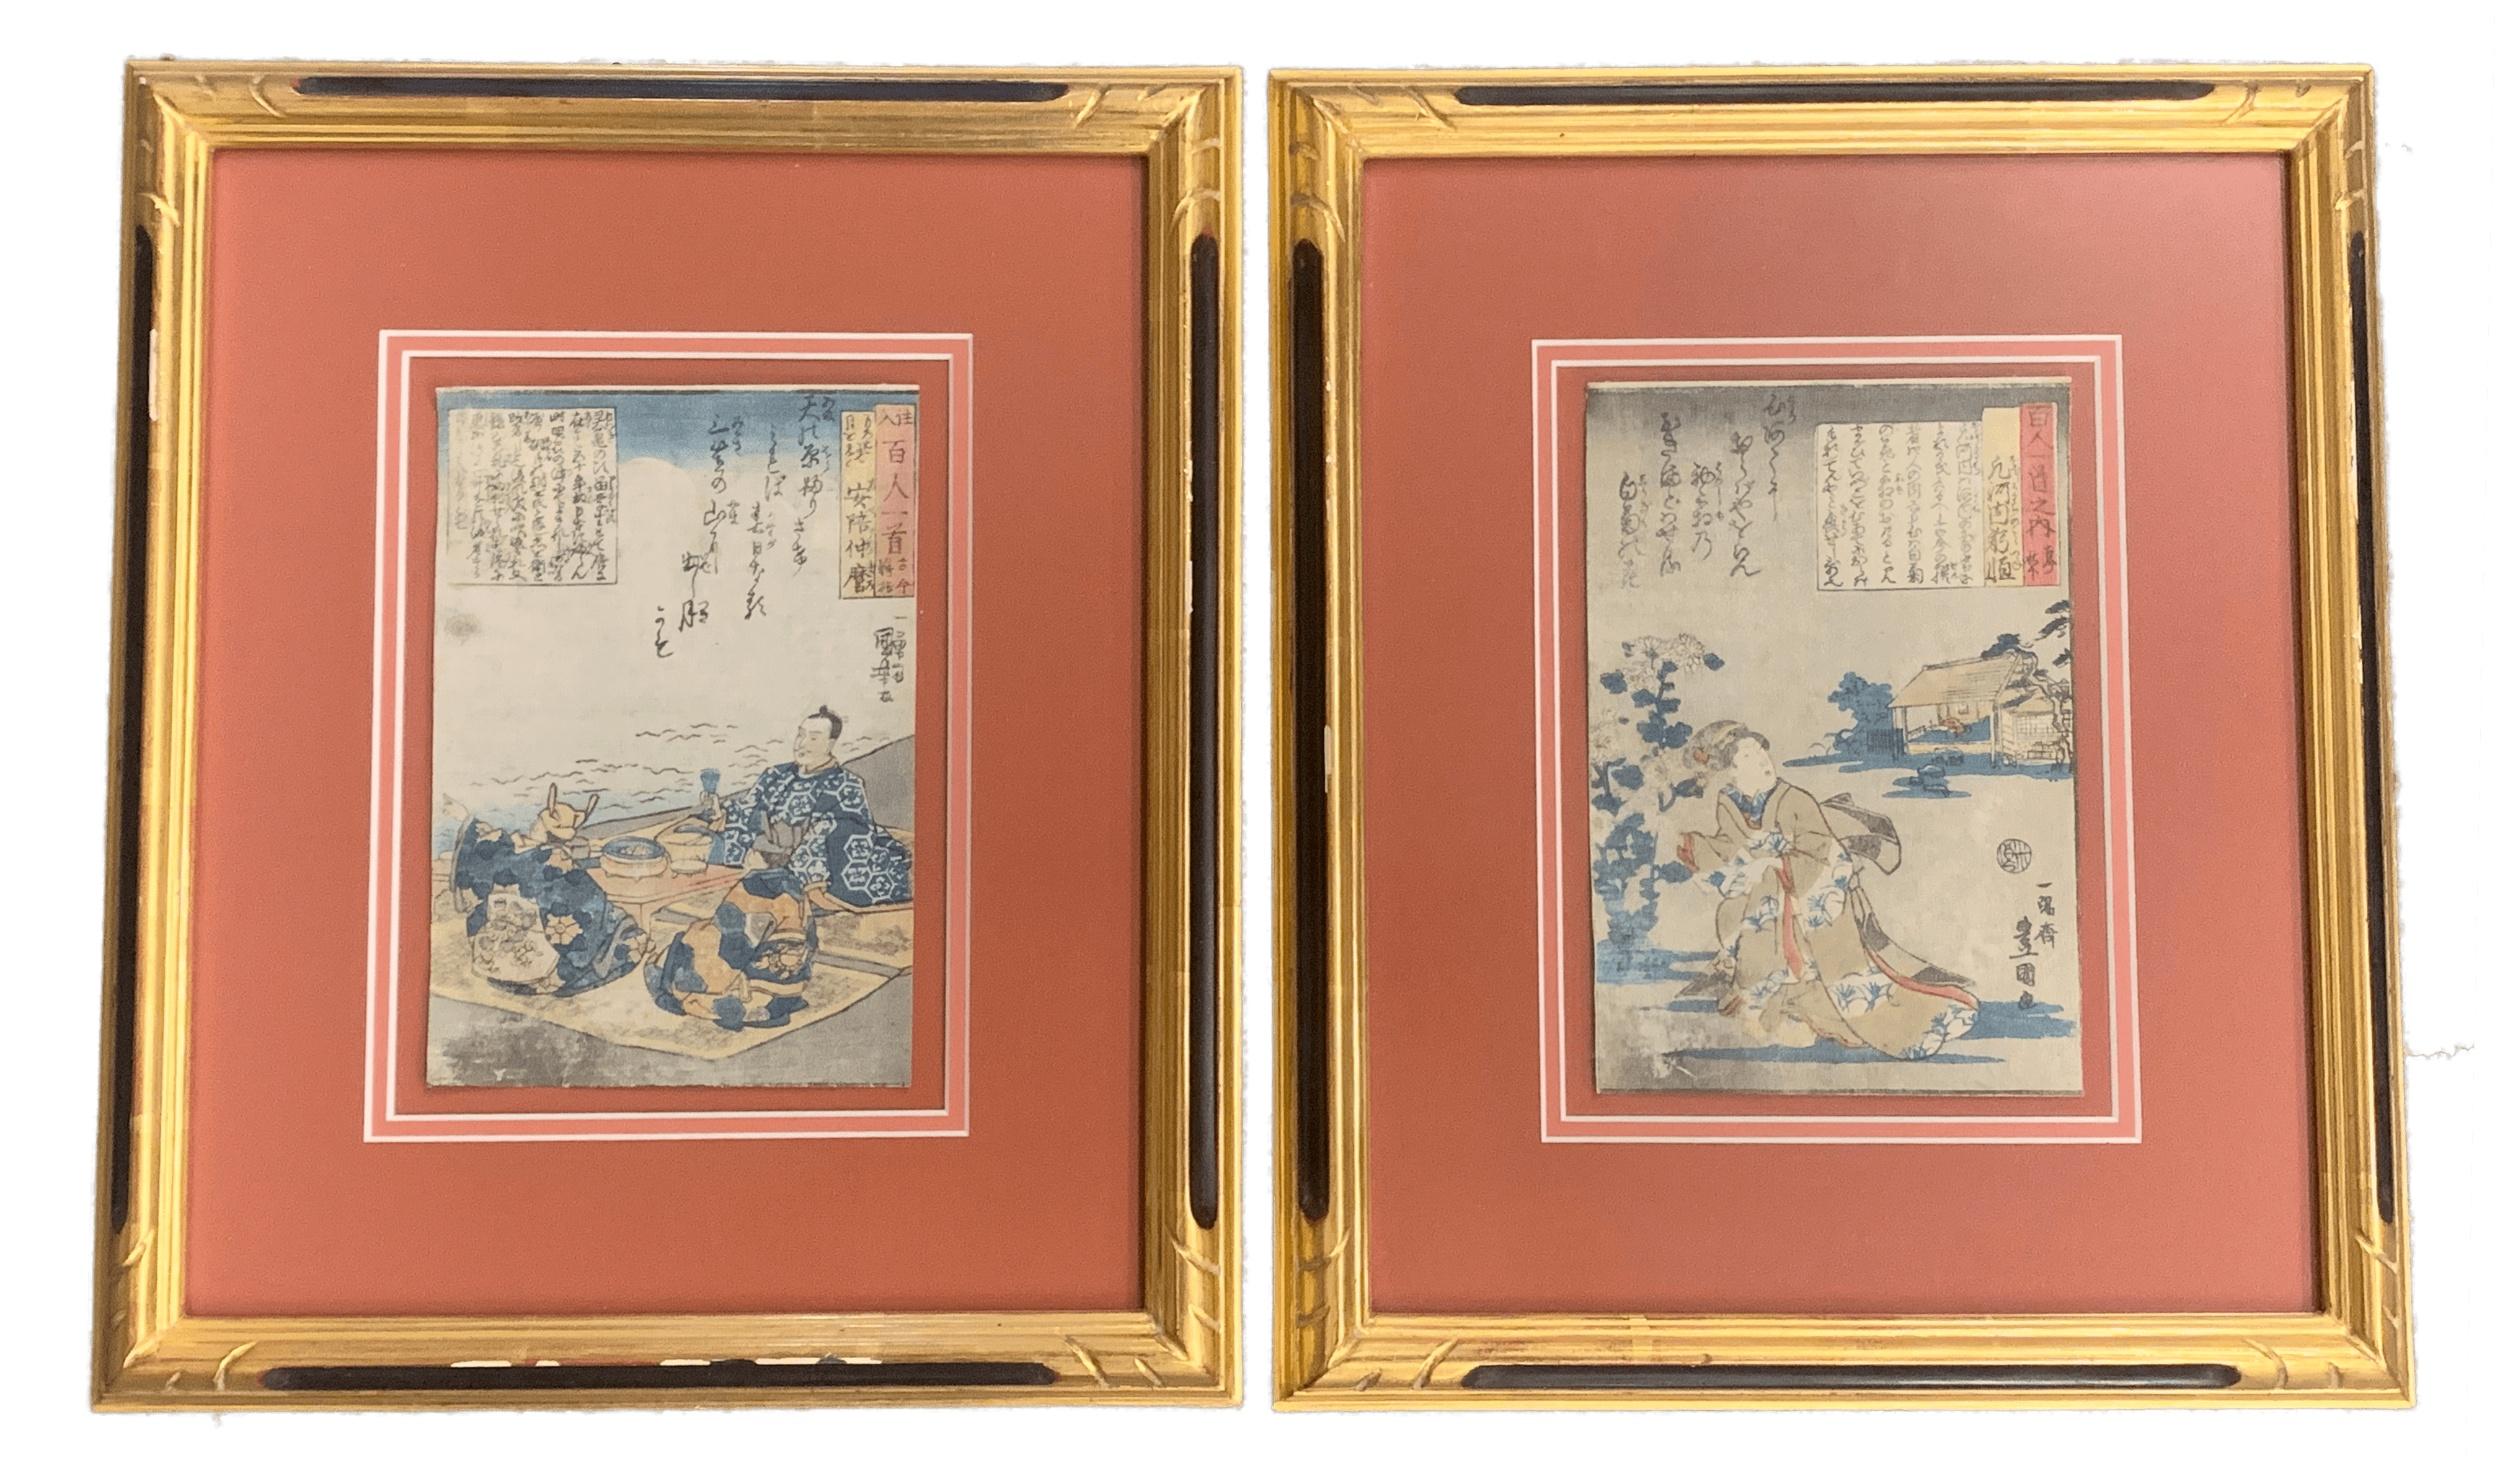 Pair of 19th Century Japanese Woodblocks by Utagawa Kuniyoshi in Custom Frames In Good Condition For Sale In Stamford, CT